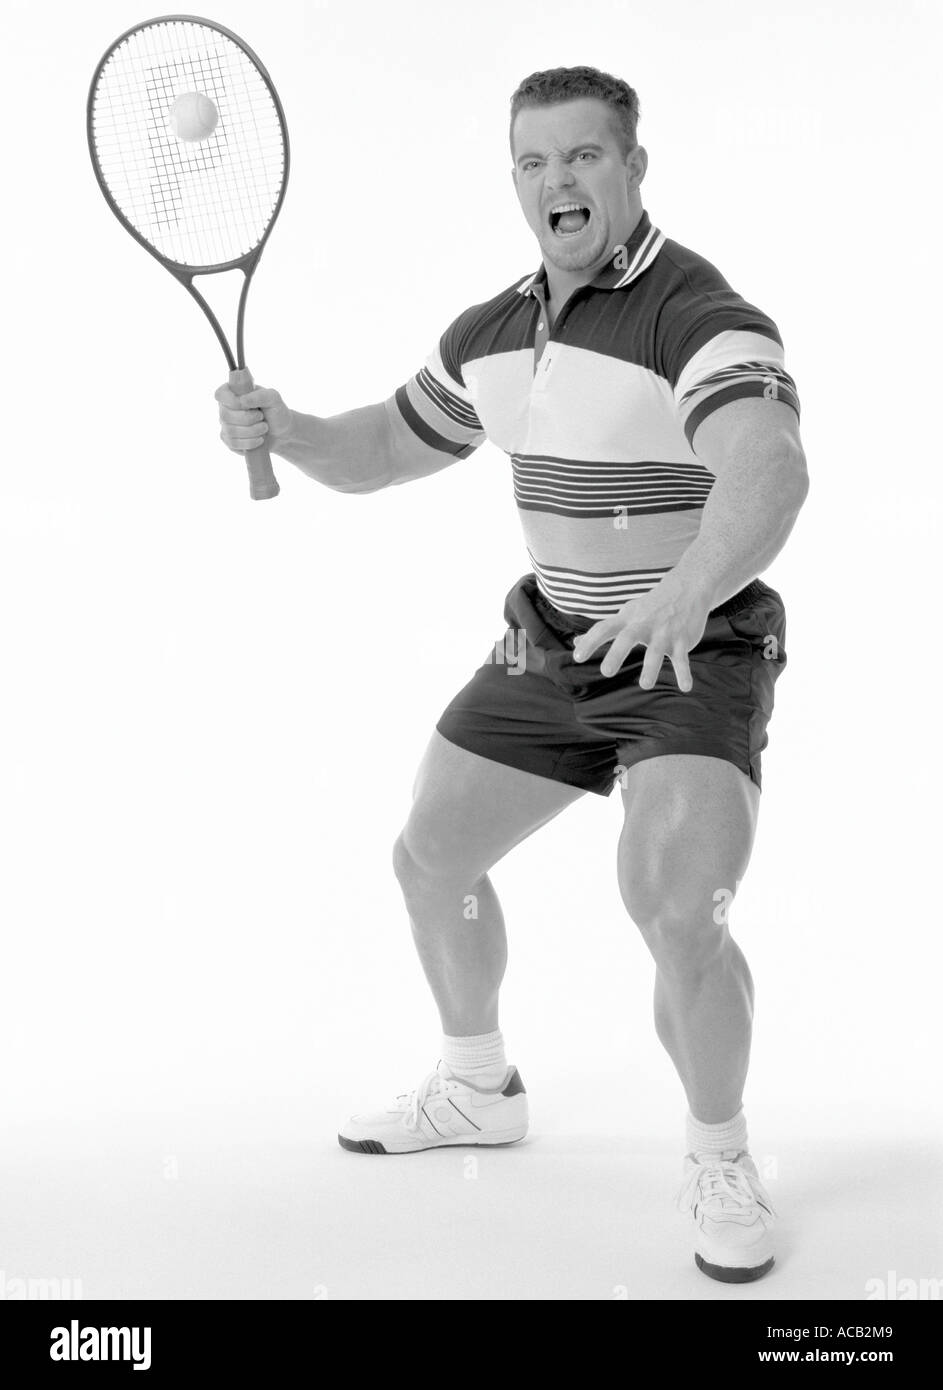 Exaggerated musclebound tennis player on white background. Stock Photo